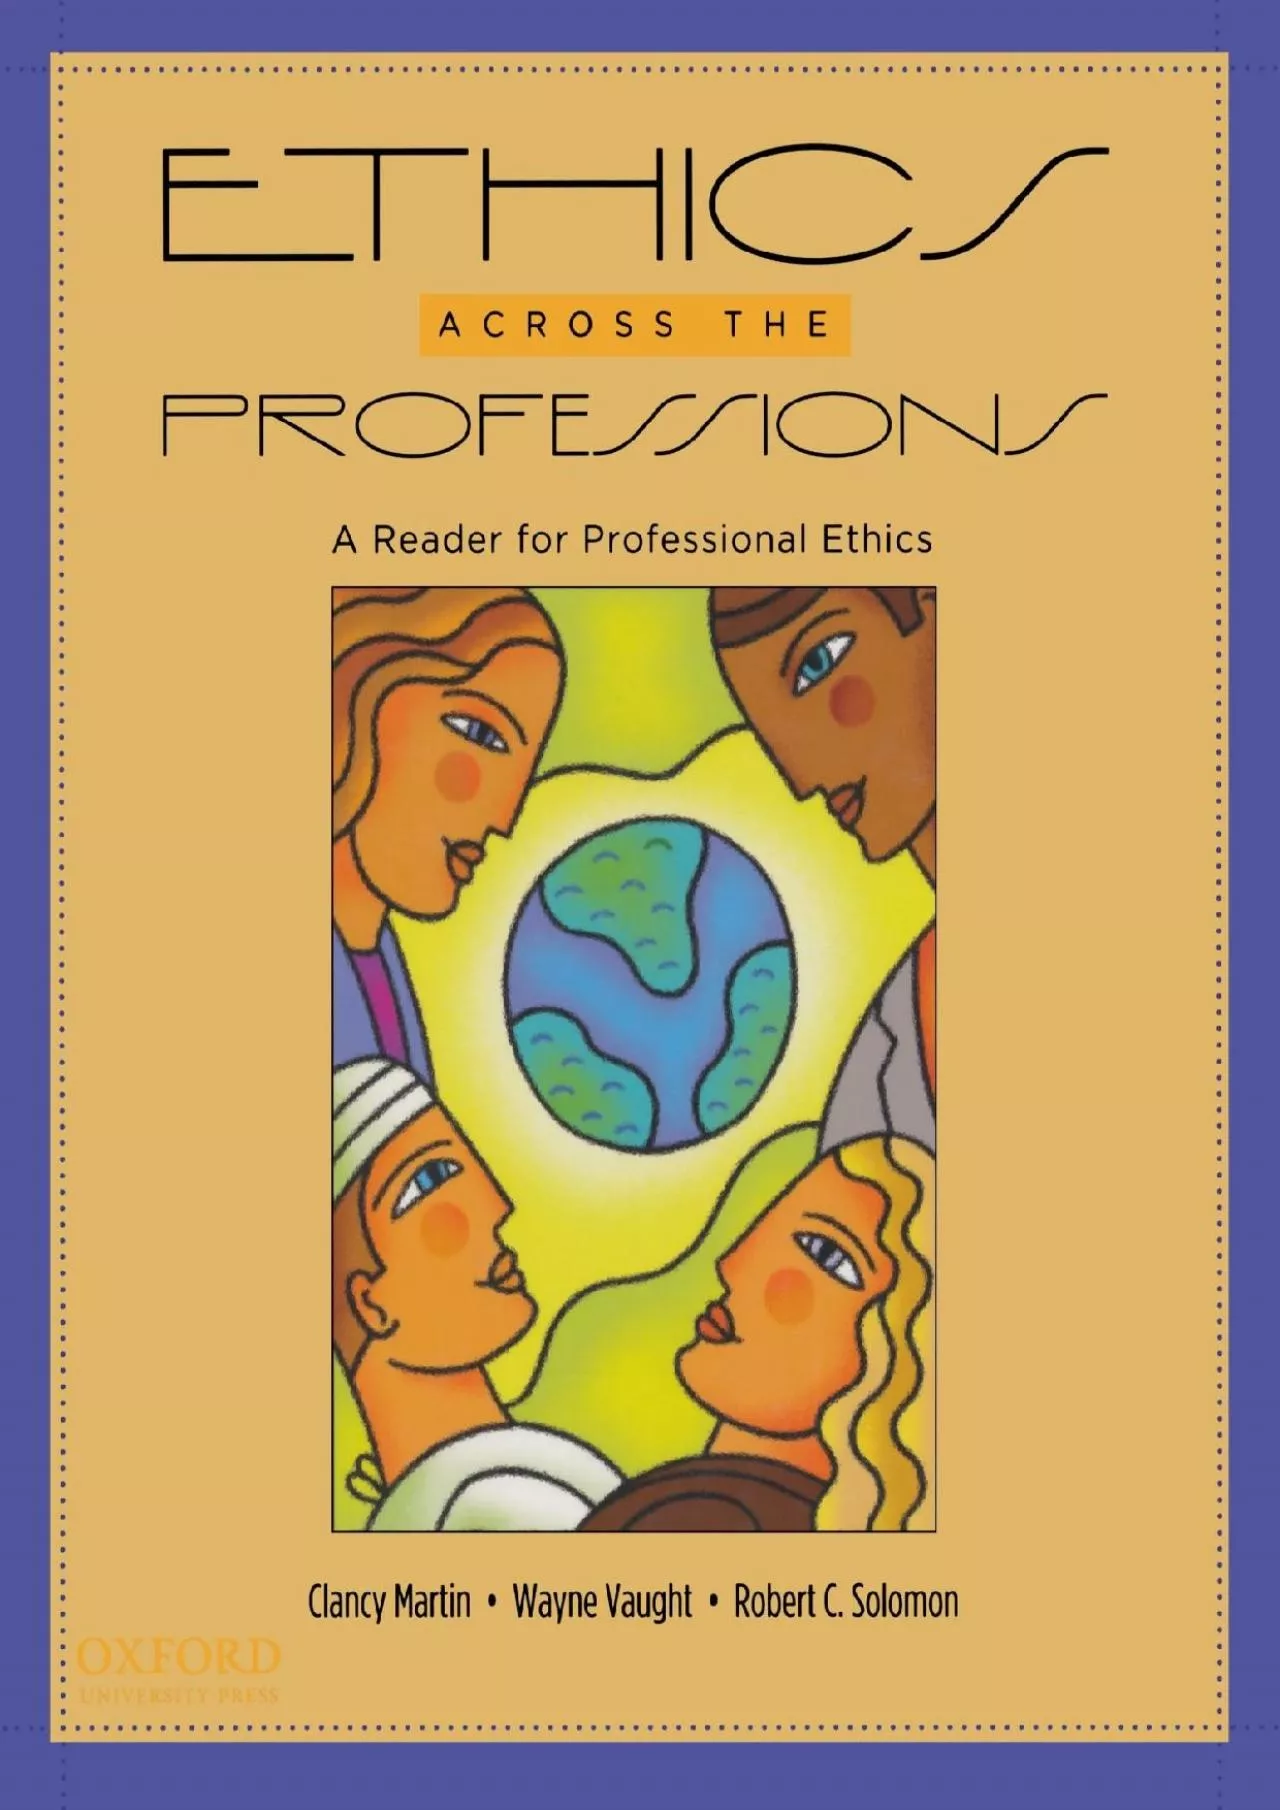 (EBOOK)-Ethics Across the Professions: A Reader for Professional Ethics